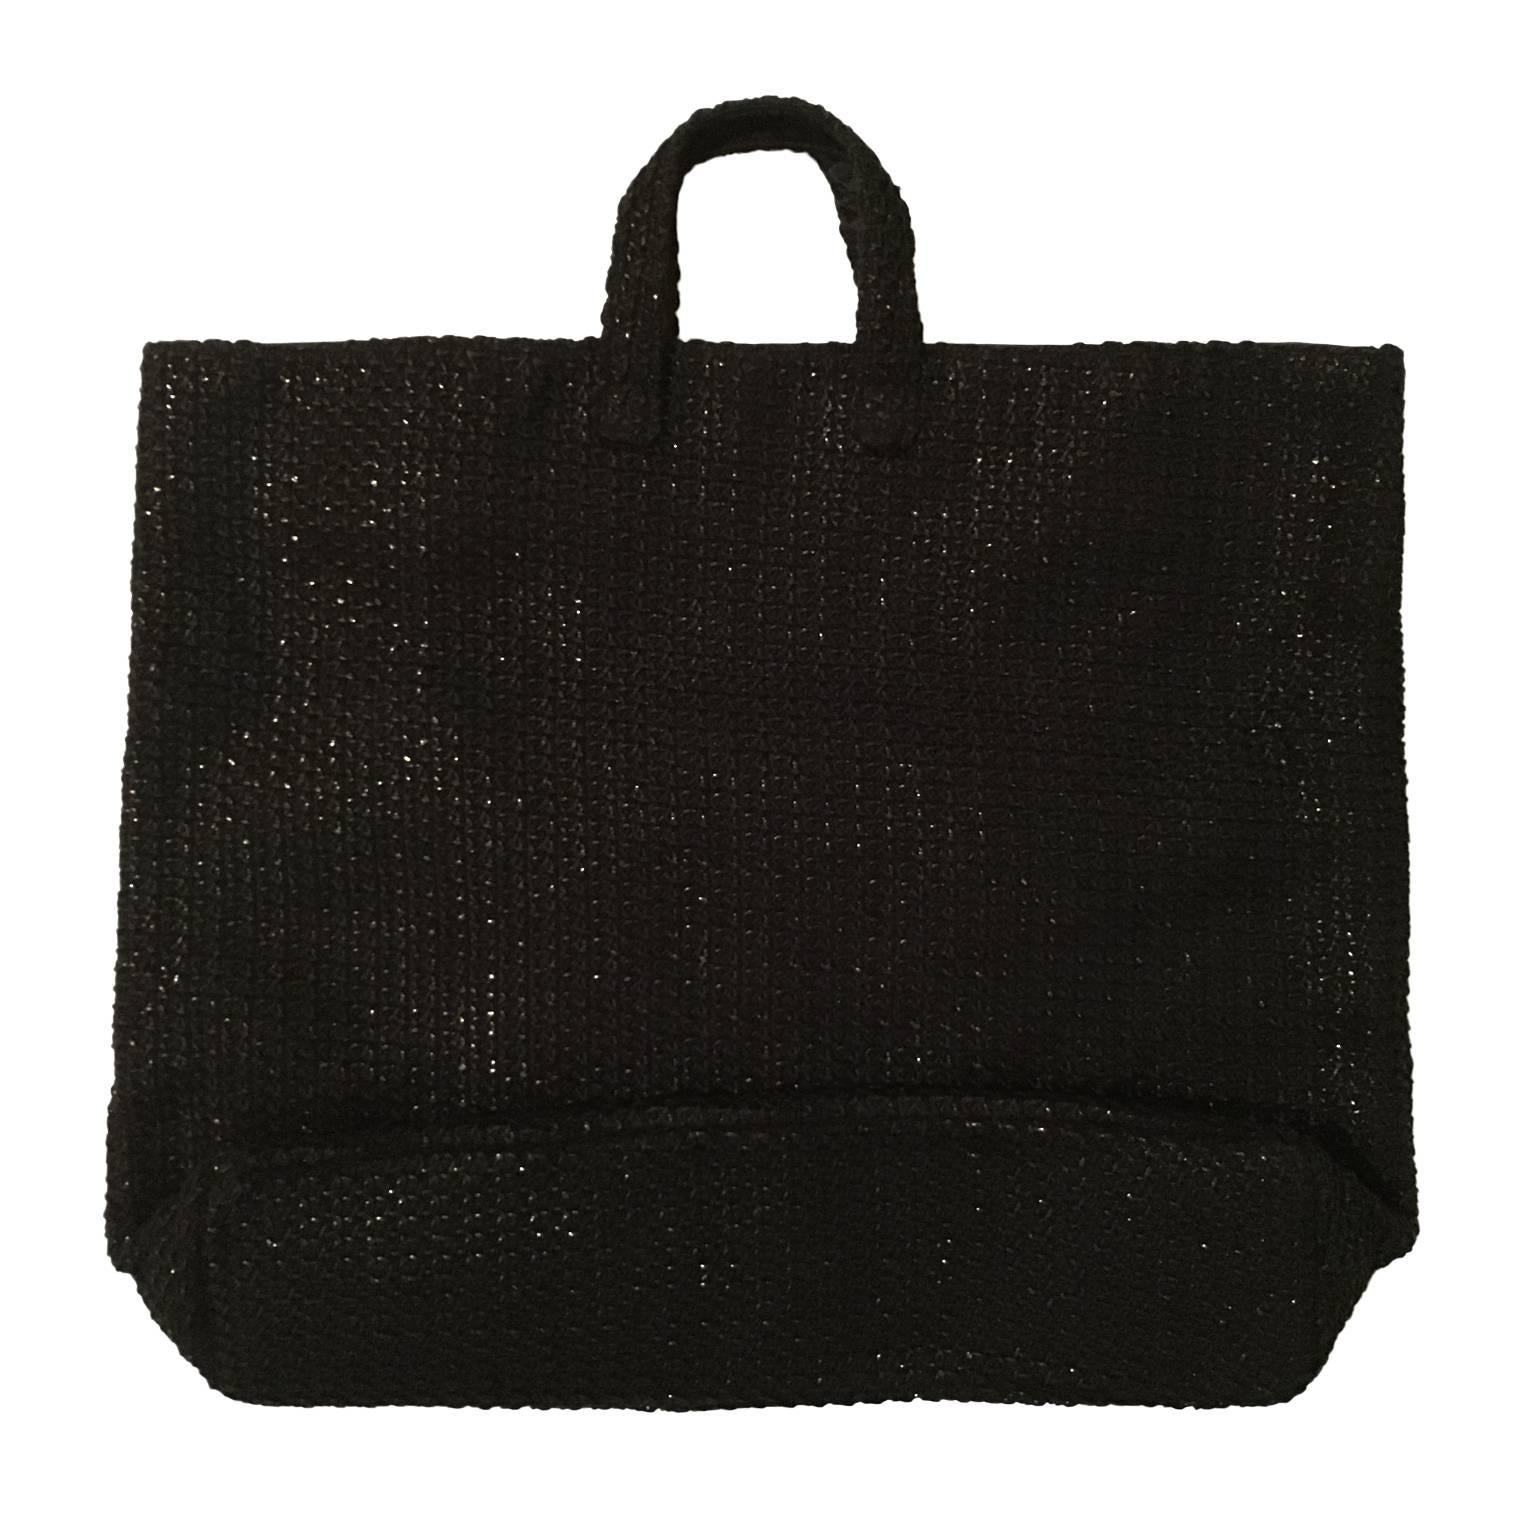 Helmut Lang tote bag from circa 90's.
Interesting texture of knitted black coated yarn has been pressed on textile.
With black lining, one inner pocket with zipper.
Measurements :
47cm x  42cm x 9 cm

